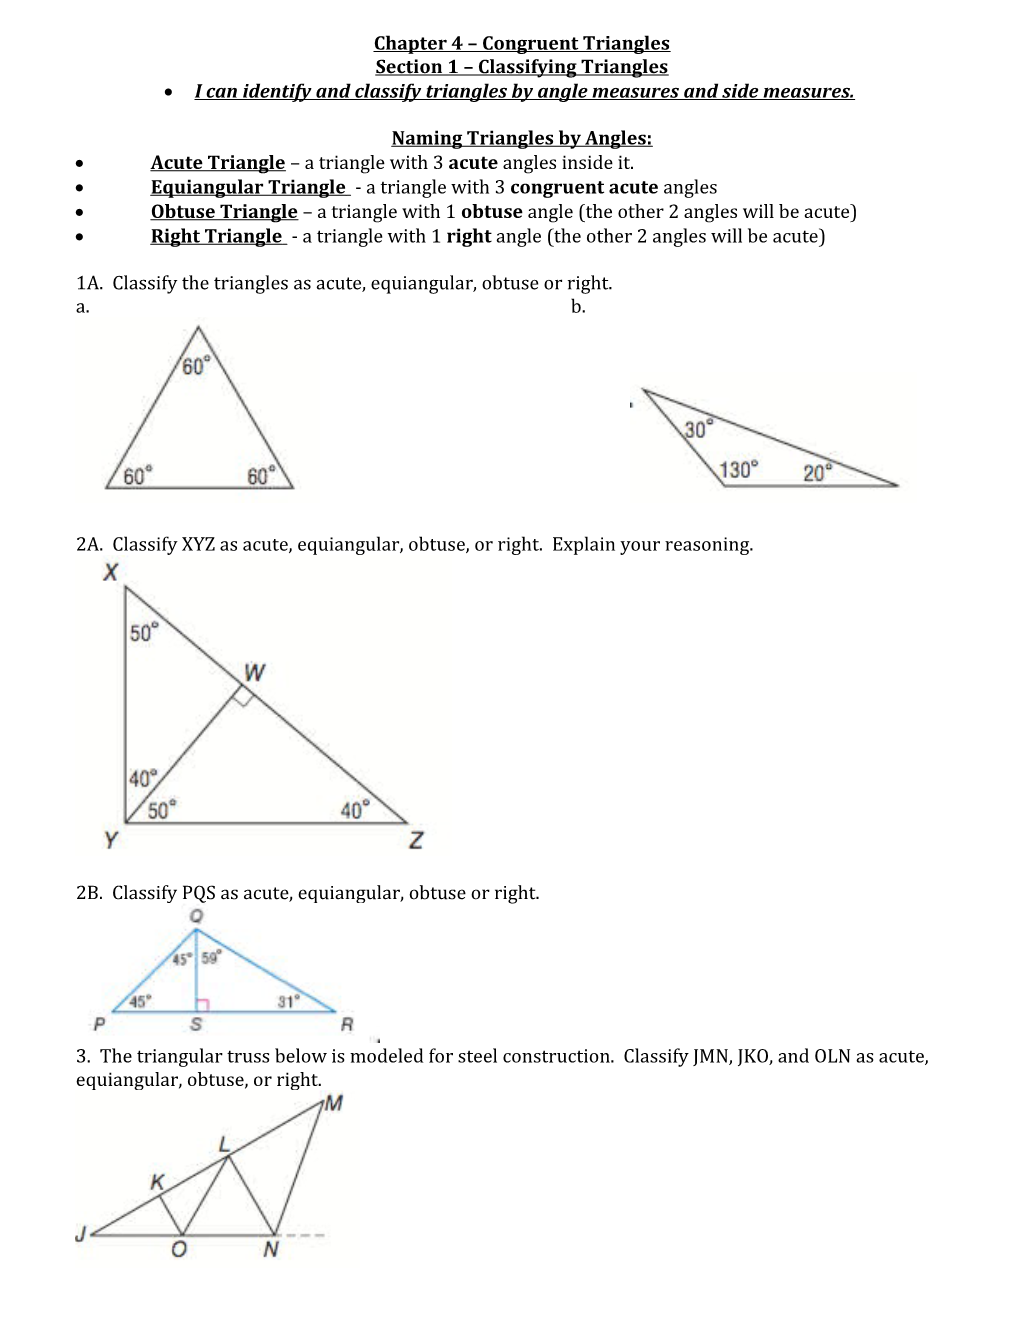 Chapter 4 Congruent Triangles